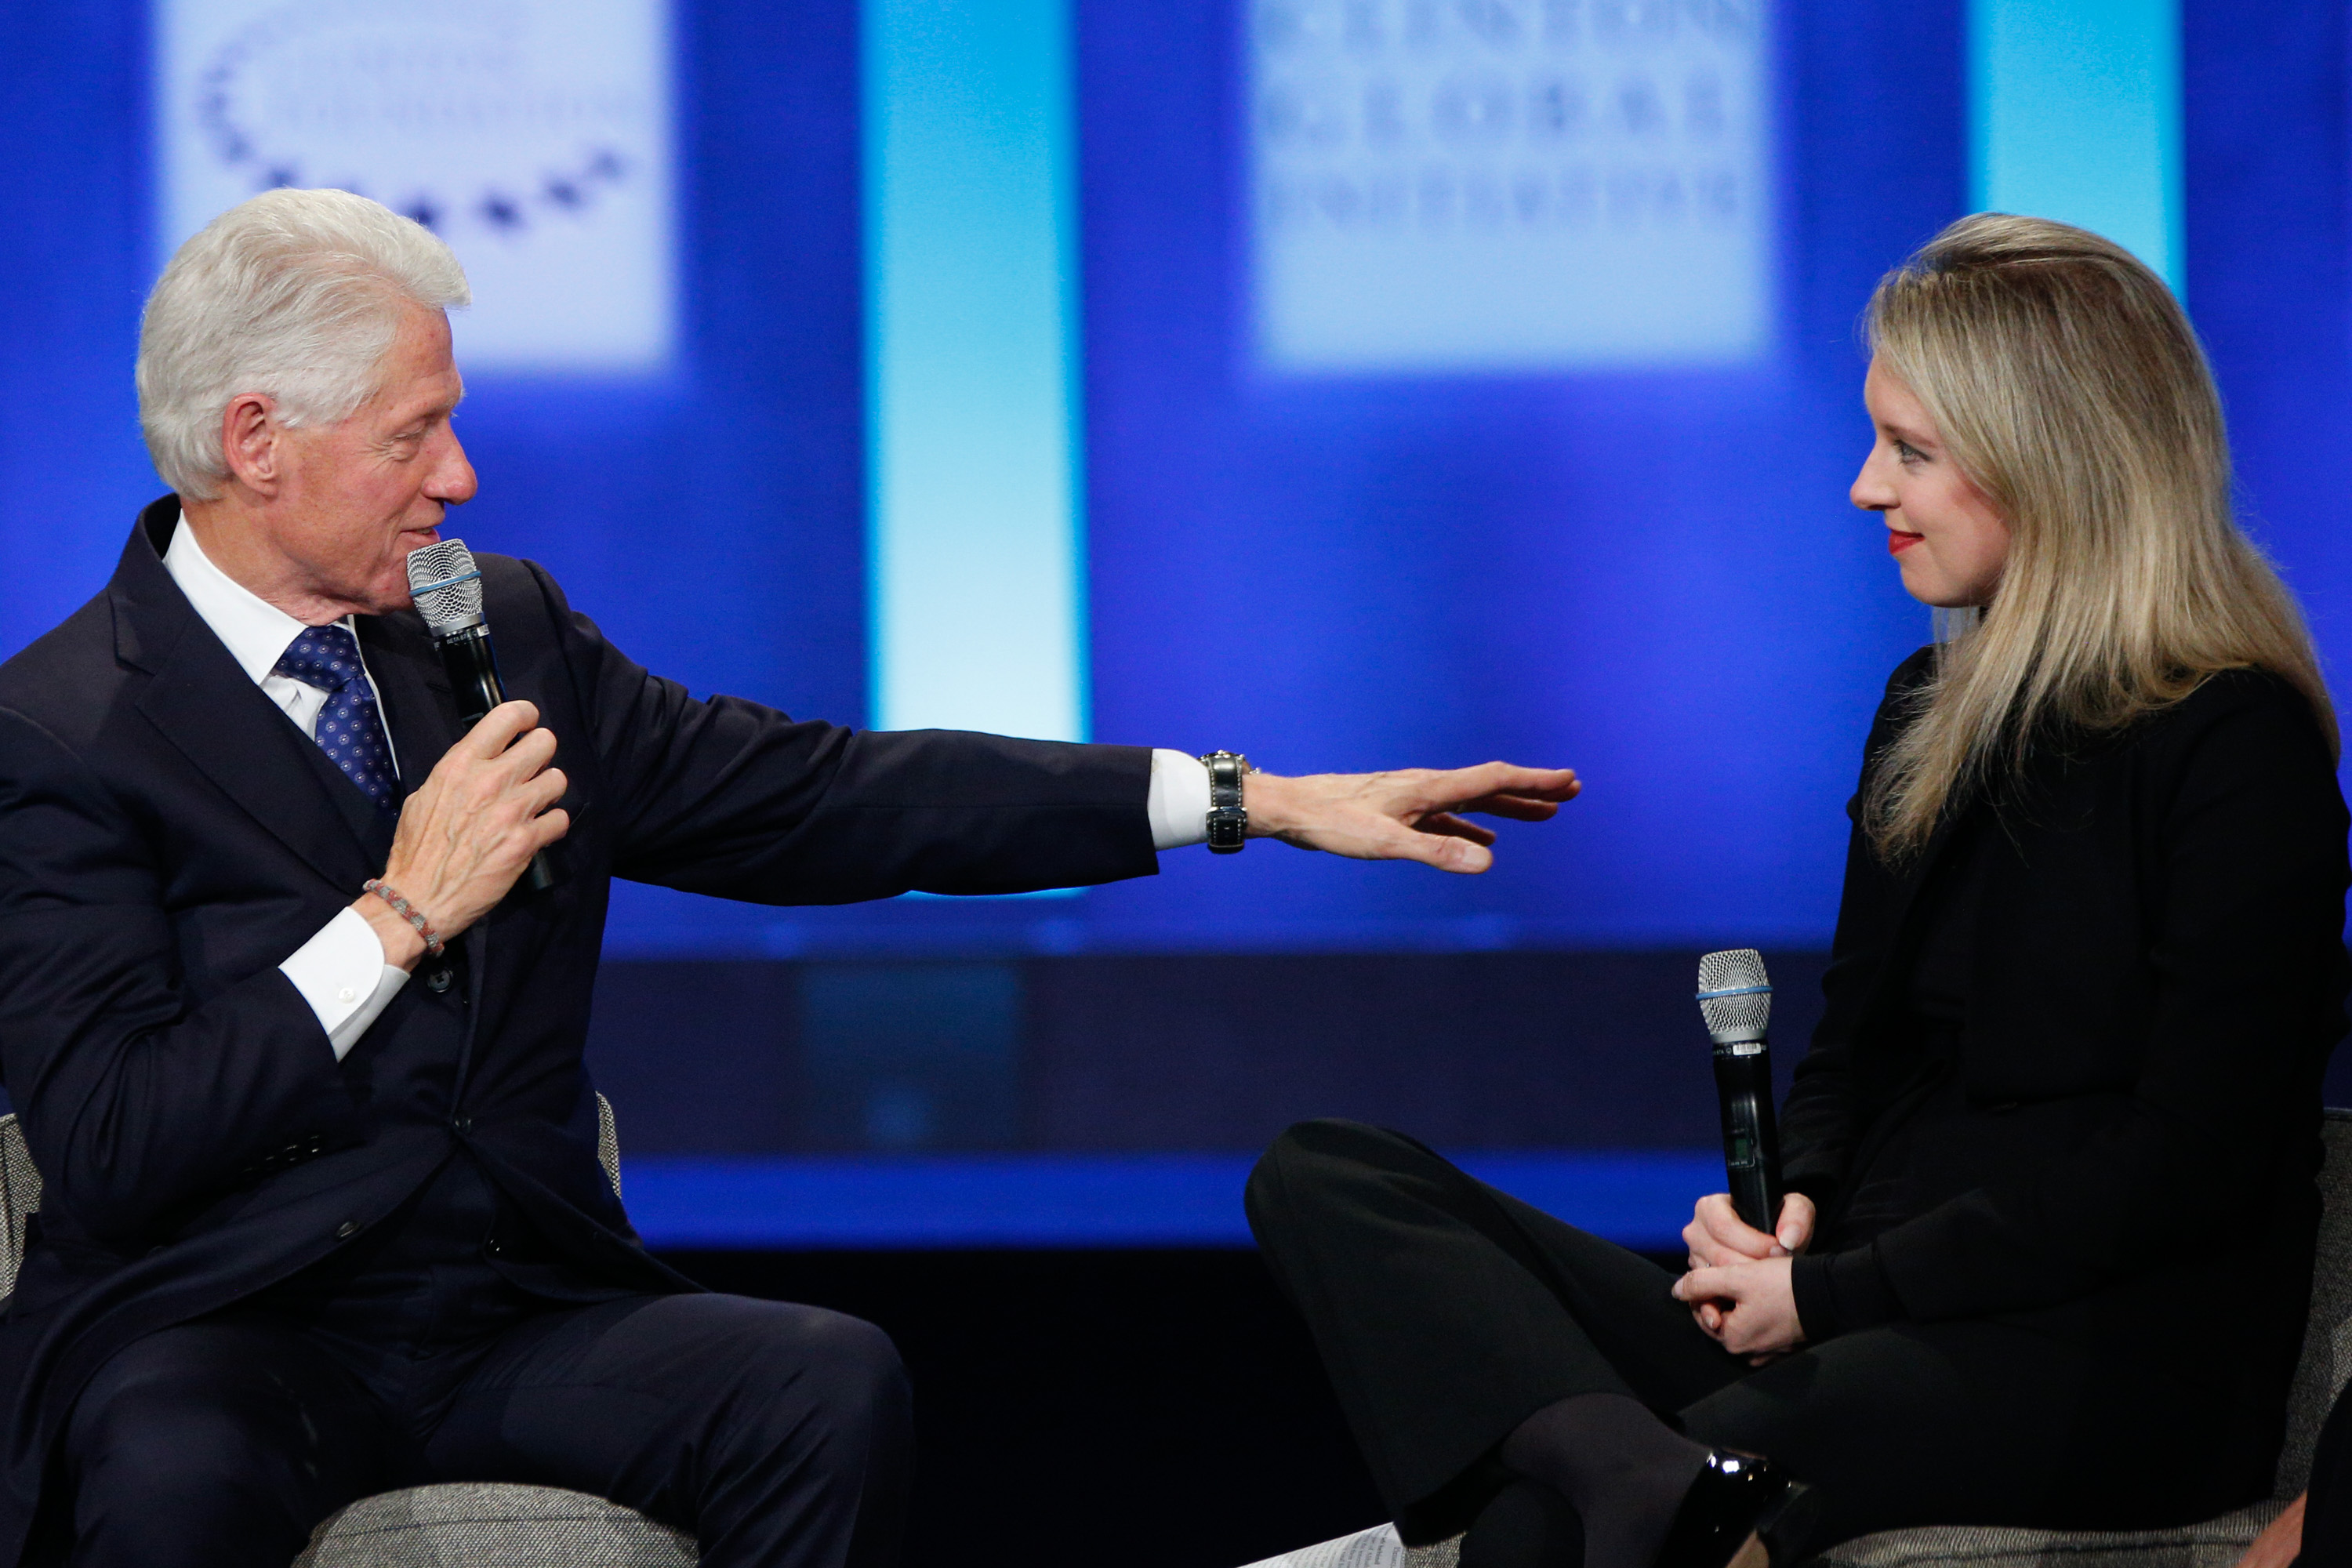 Bill Clinton and Theranos CEO Elizabeth Holmes during closing session of Clinton Global Initiative on Sept. 29, 2015 in New York City. Not long after, it all went wrong for Holmes and her company.